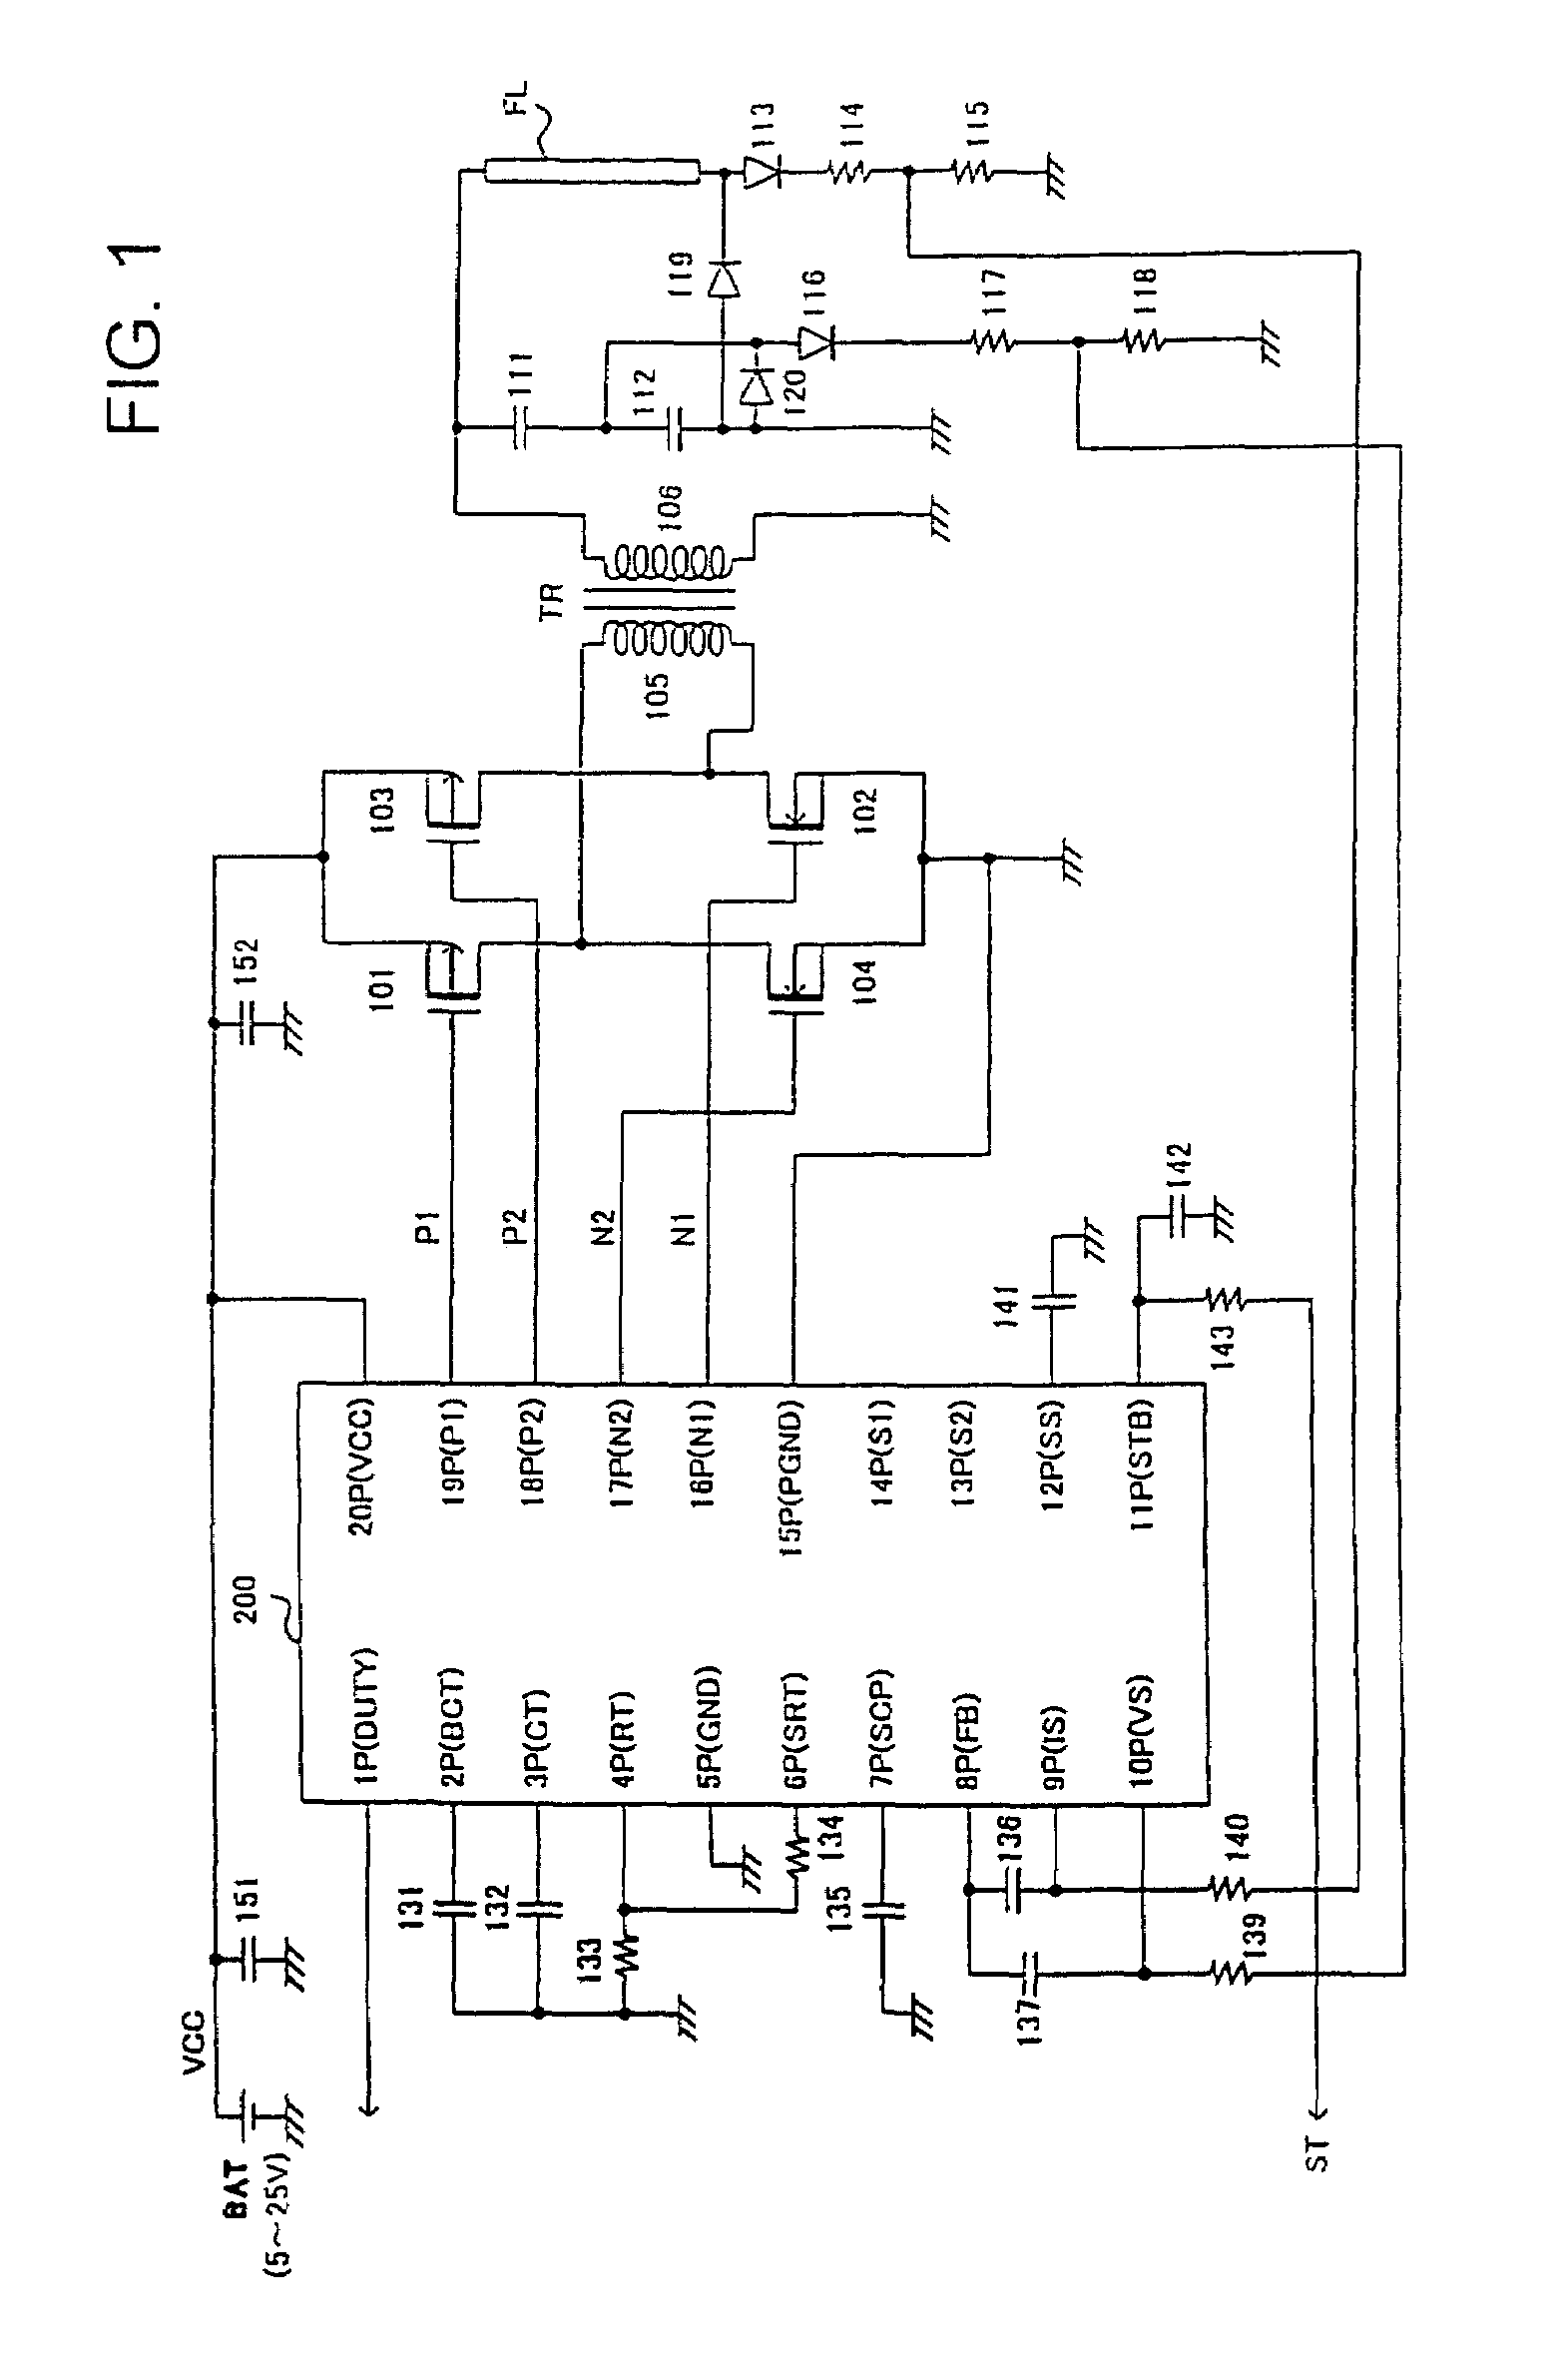 DC-AC converter, controller IC therefor, and electronic apparatus utilizing such DC-AC converter